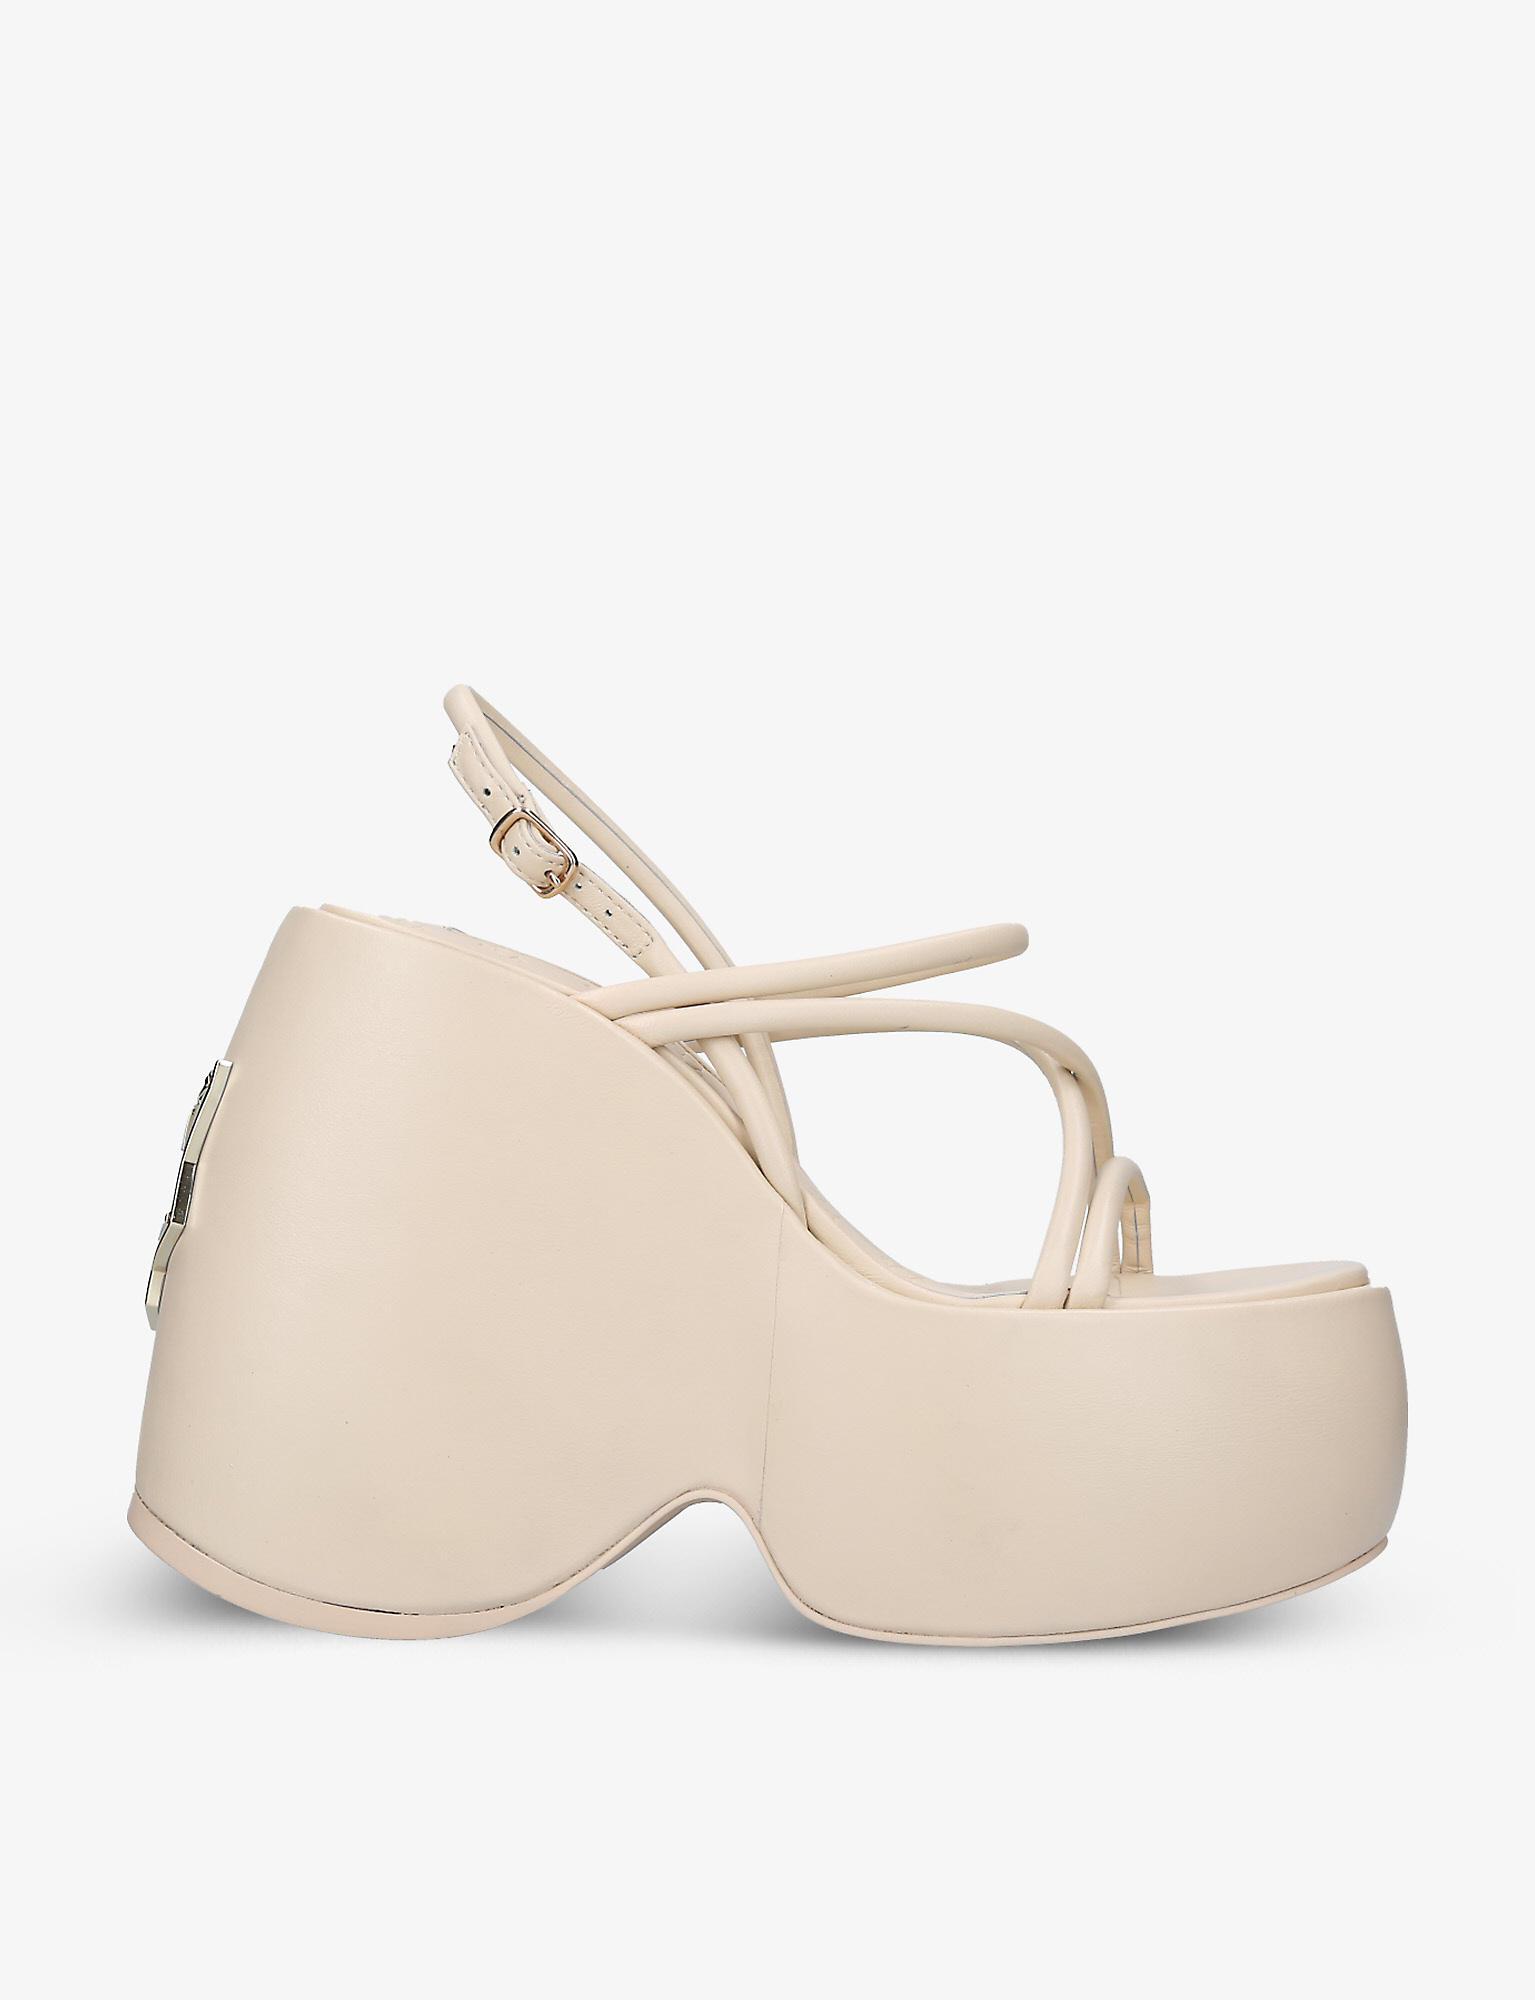 Naked Wolfe Mystery Platform Leather Wedges in Natural | Lyst